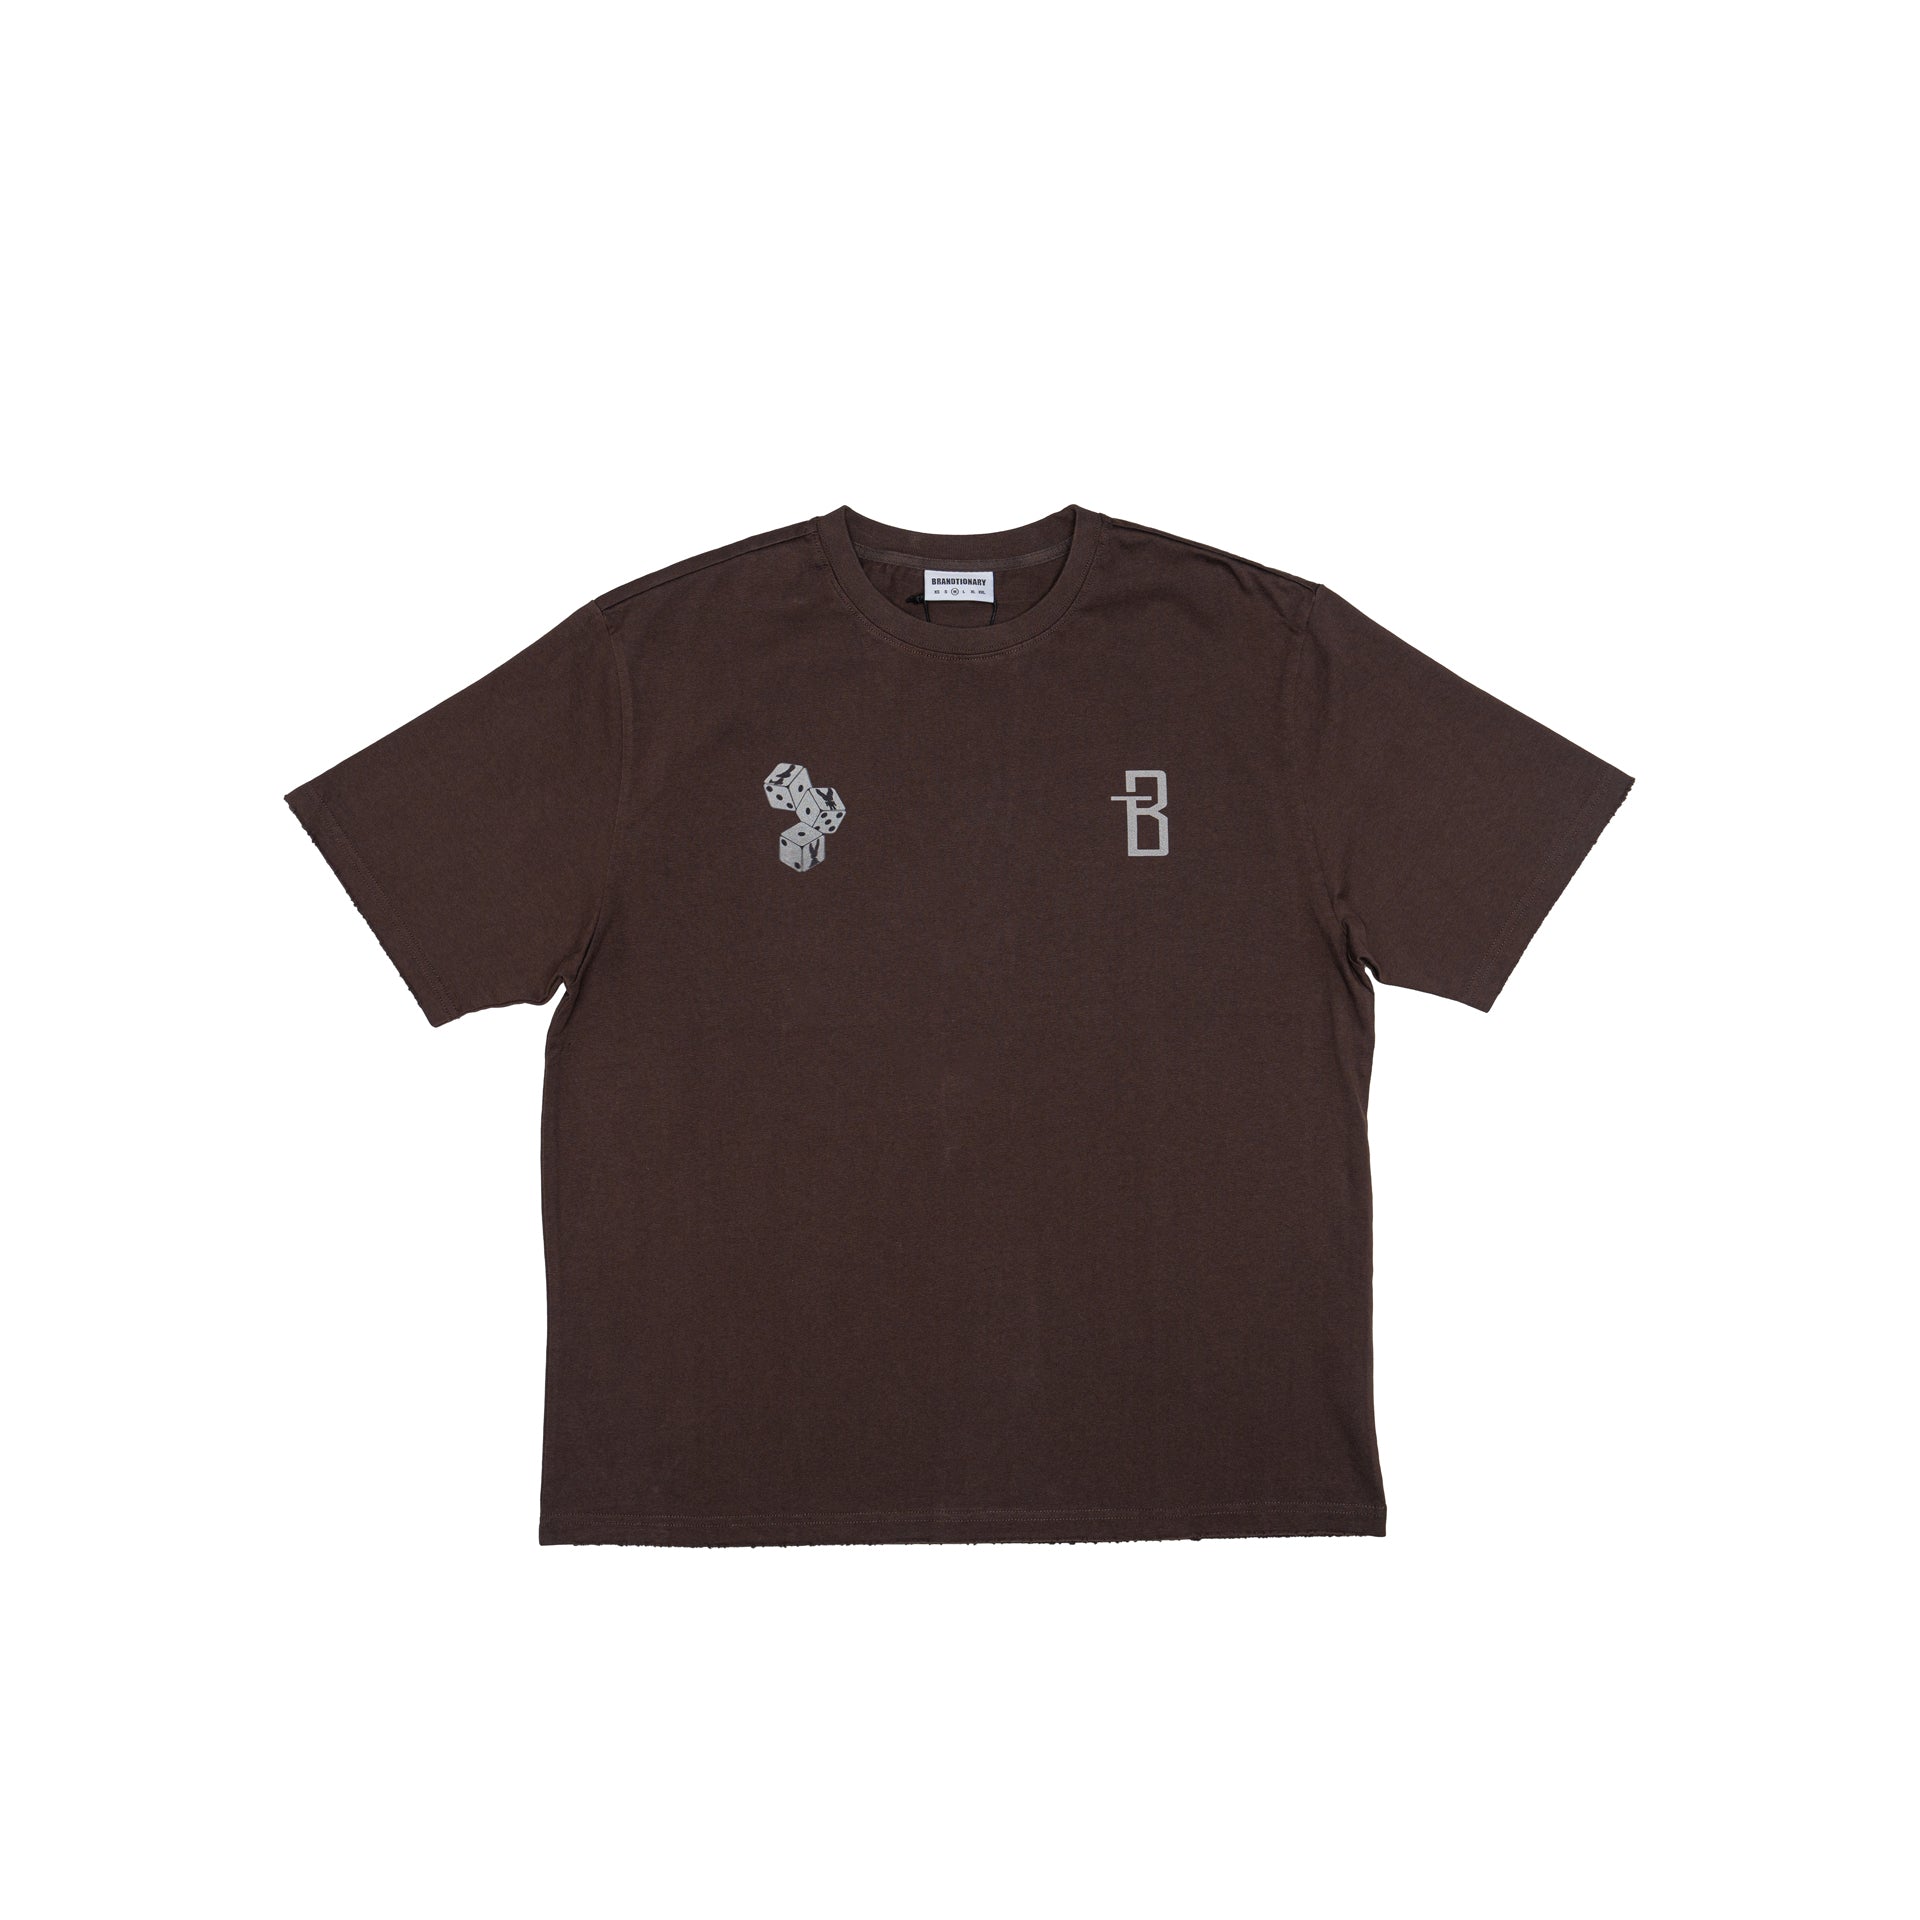 Brown T-shirt "The Dice" by Brandtionary